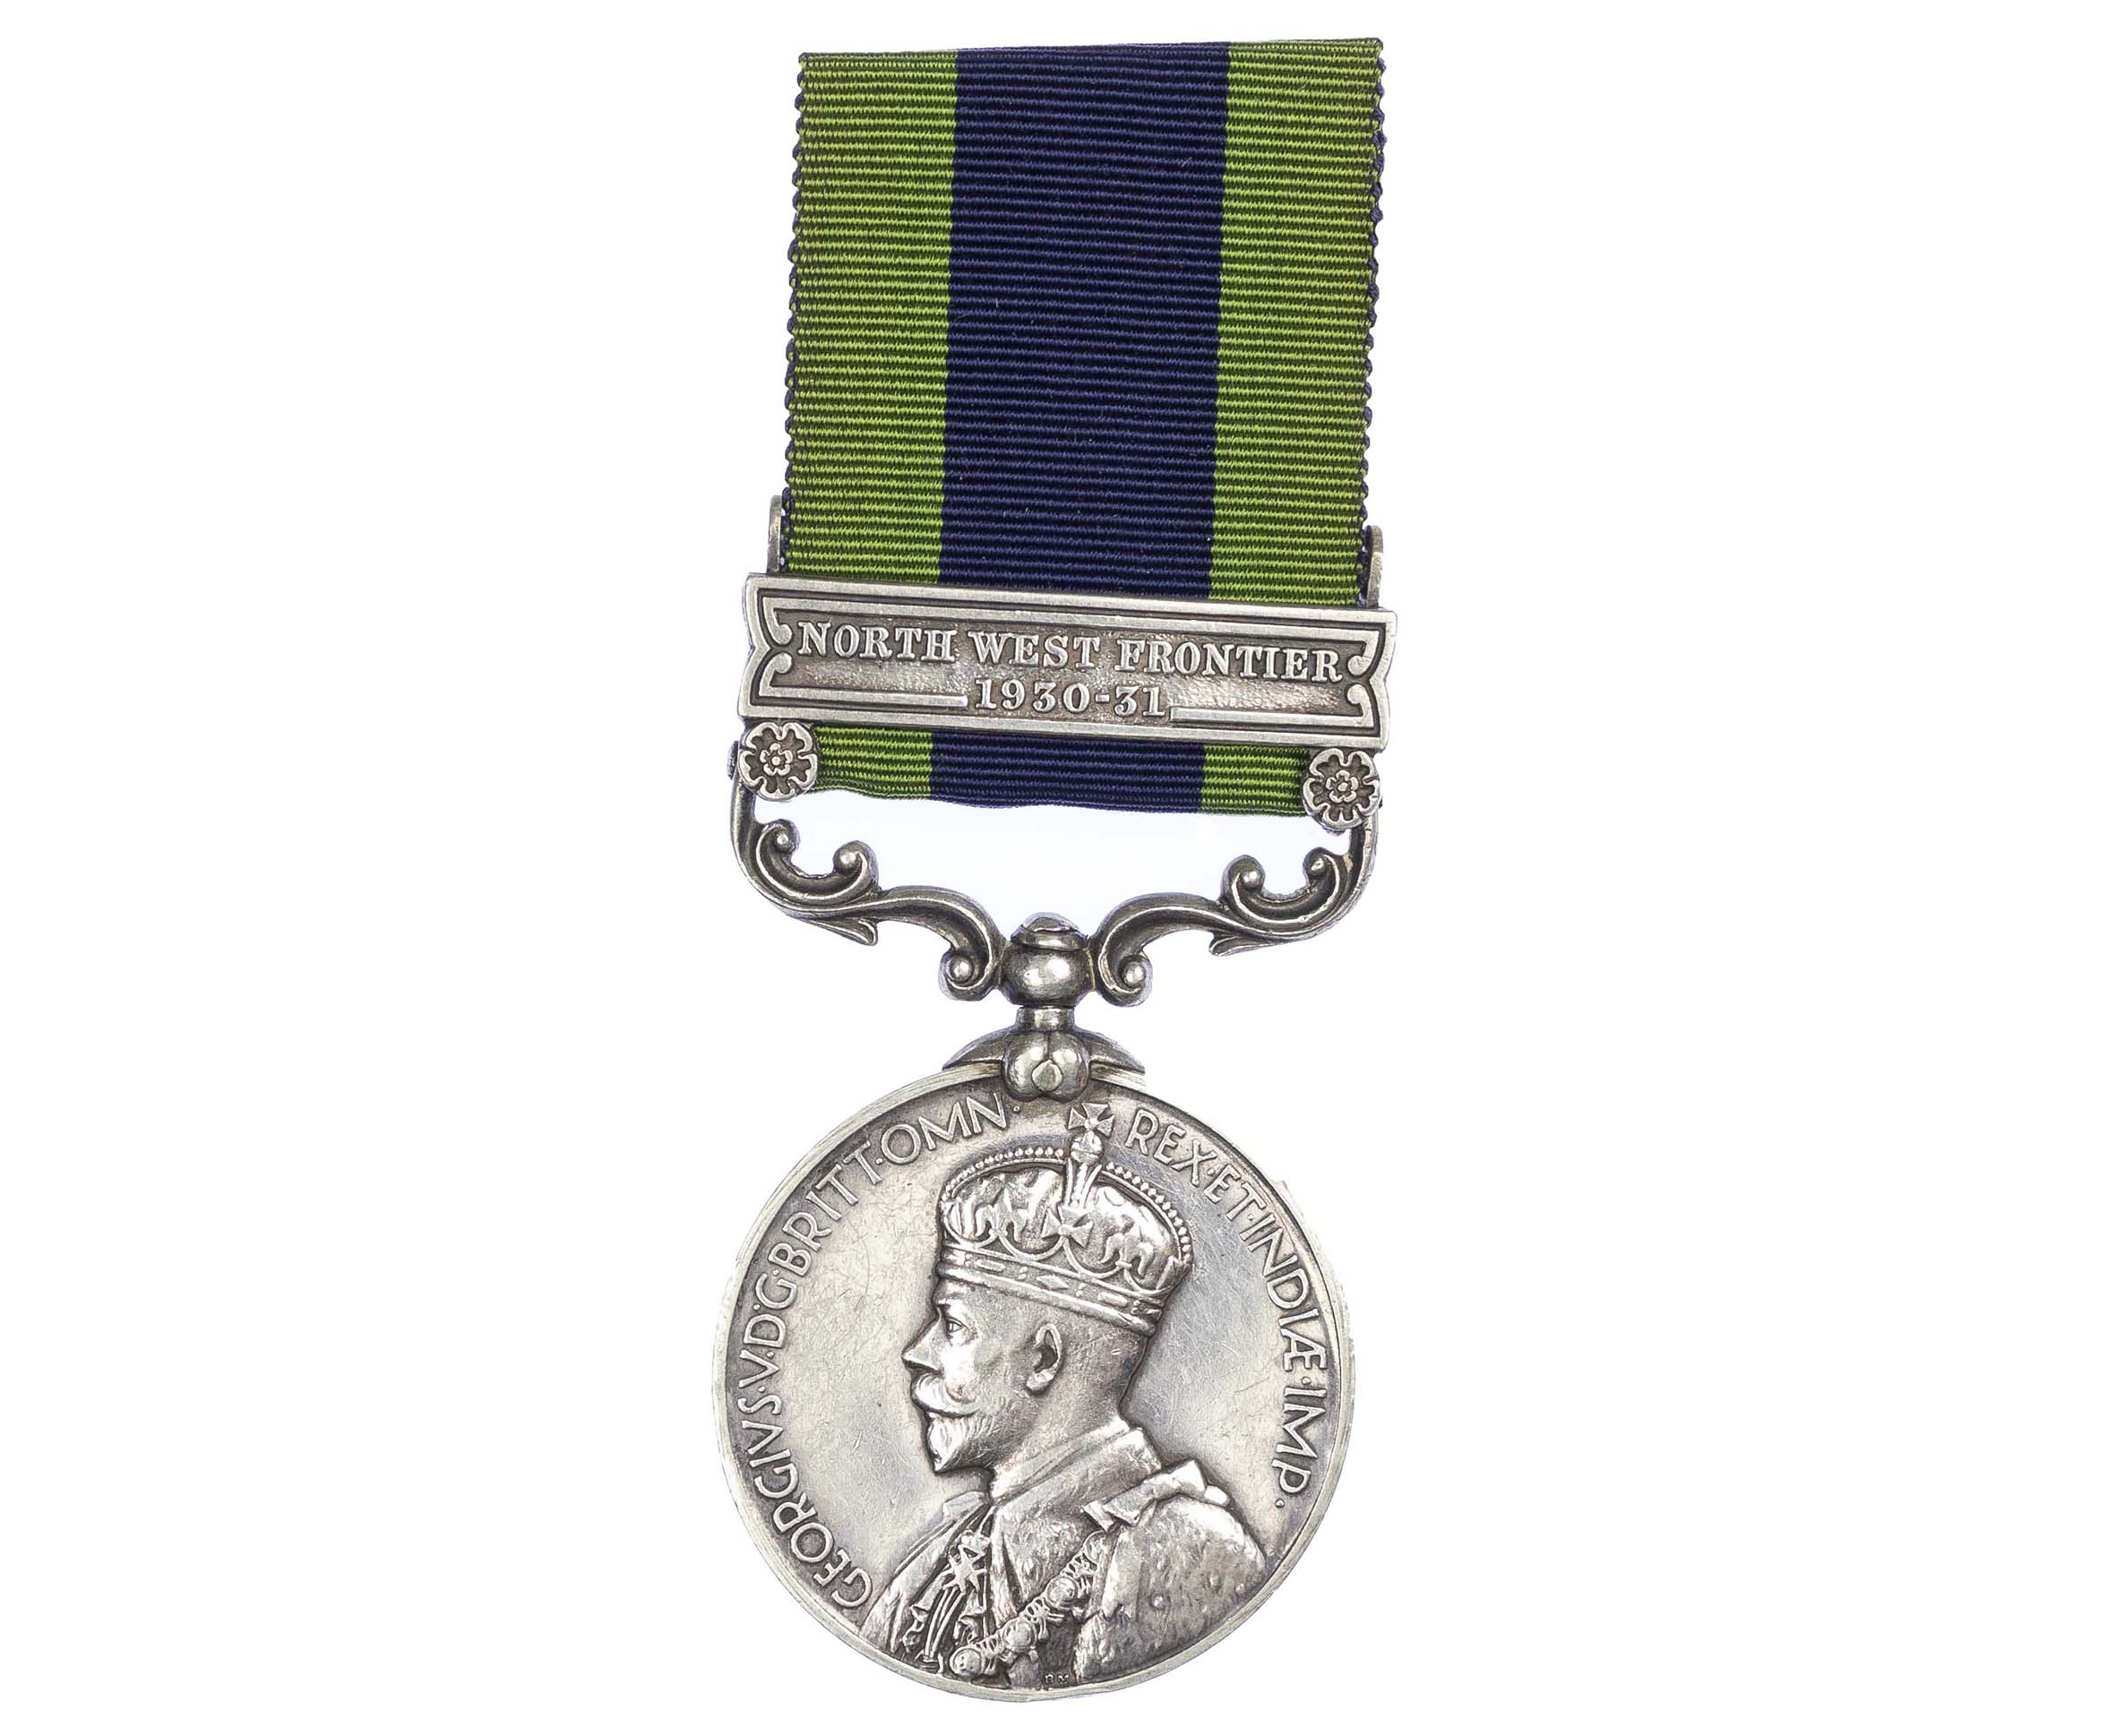 India General Service Medal 1908-1935, GVR, one clasp North West Frontier 1930-31, to Sweeper Hazari